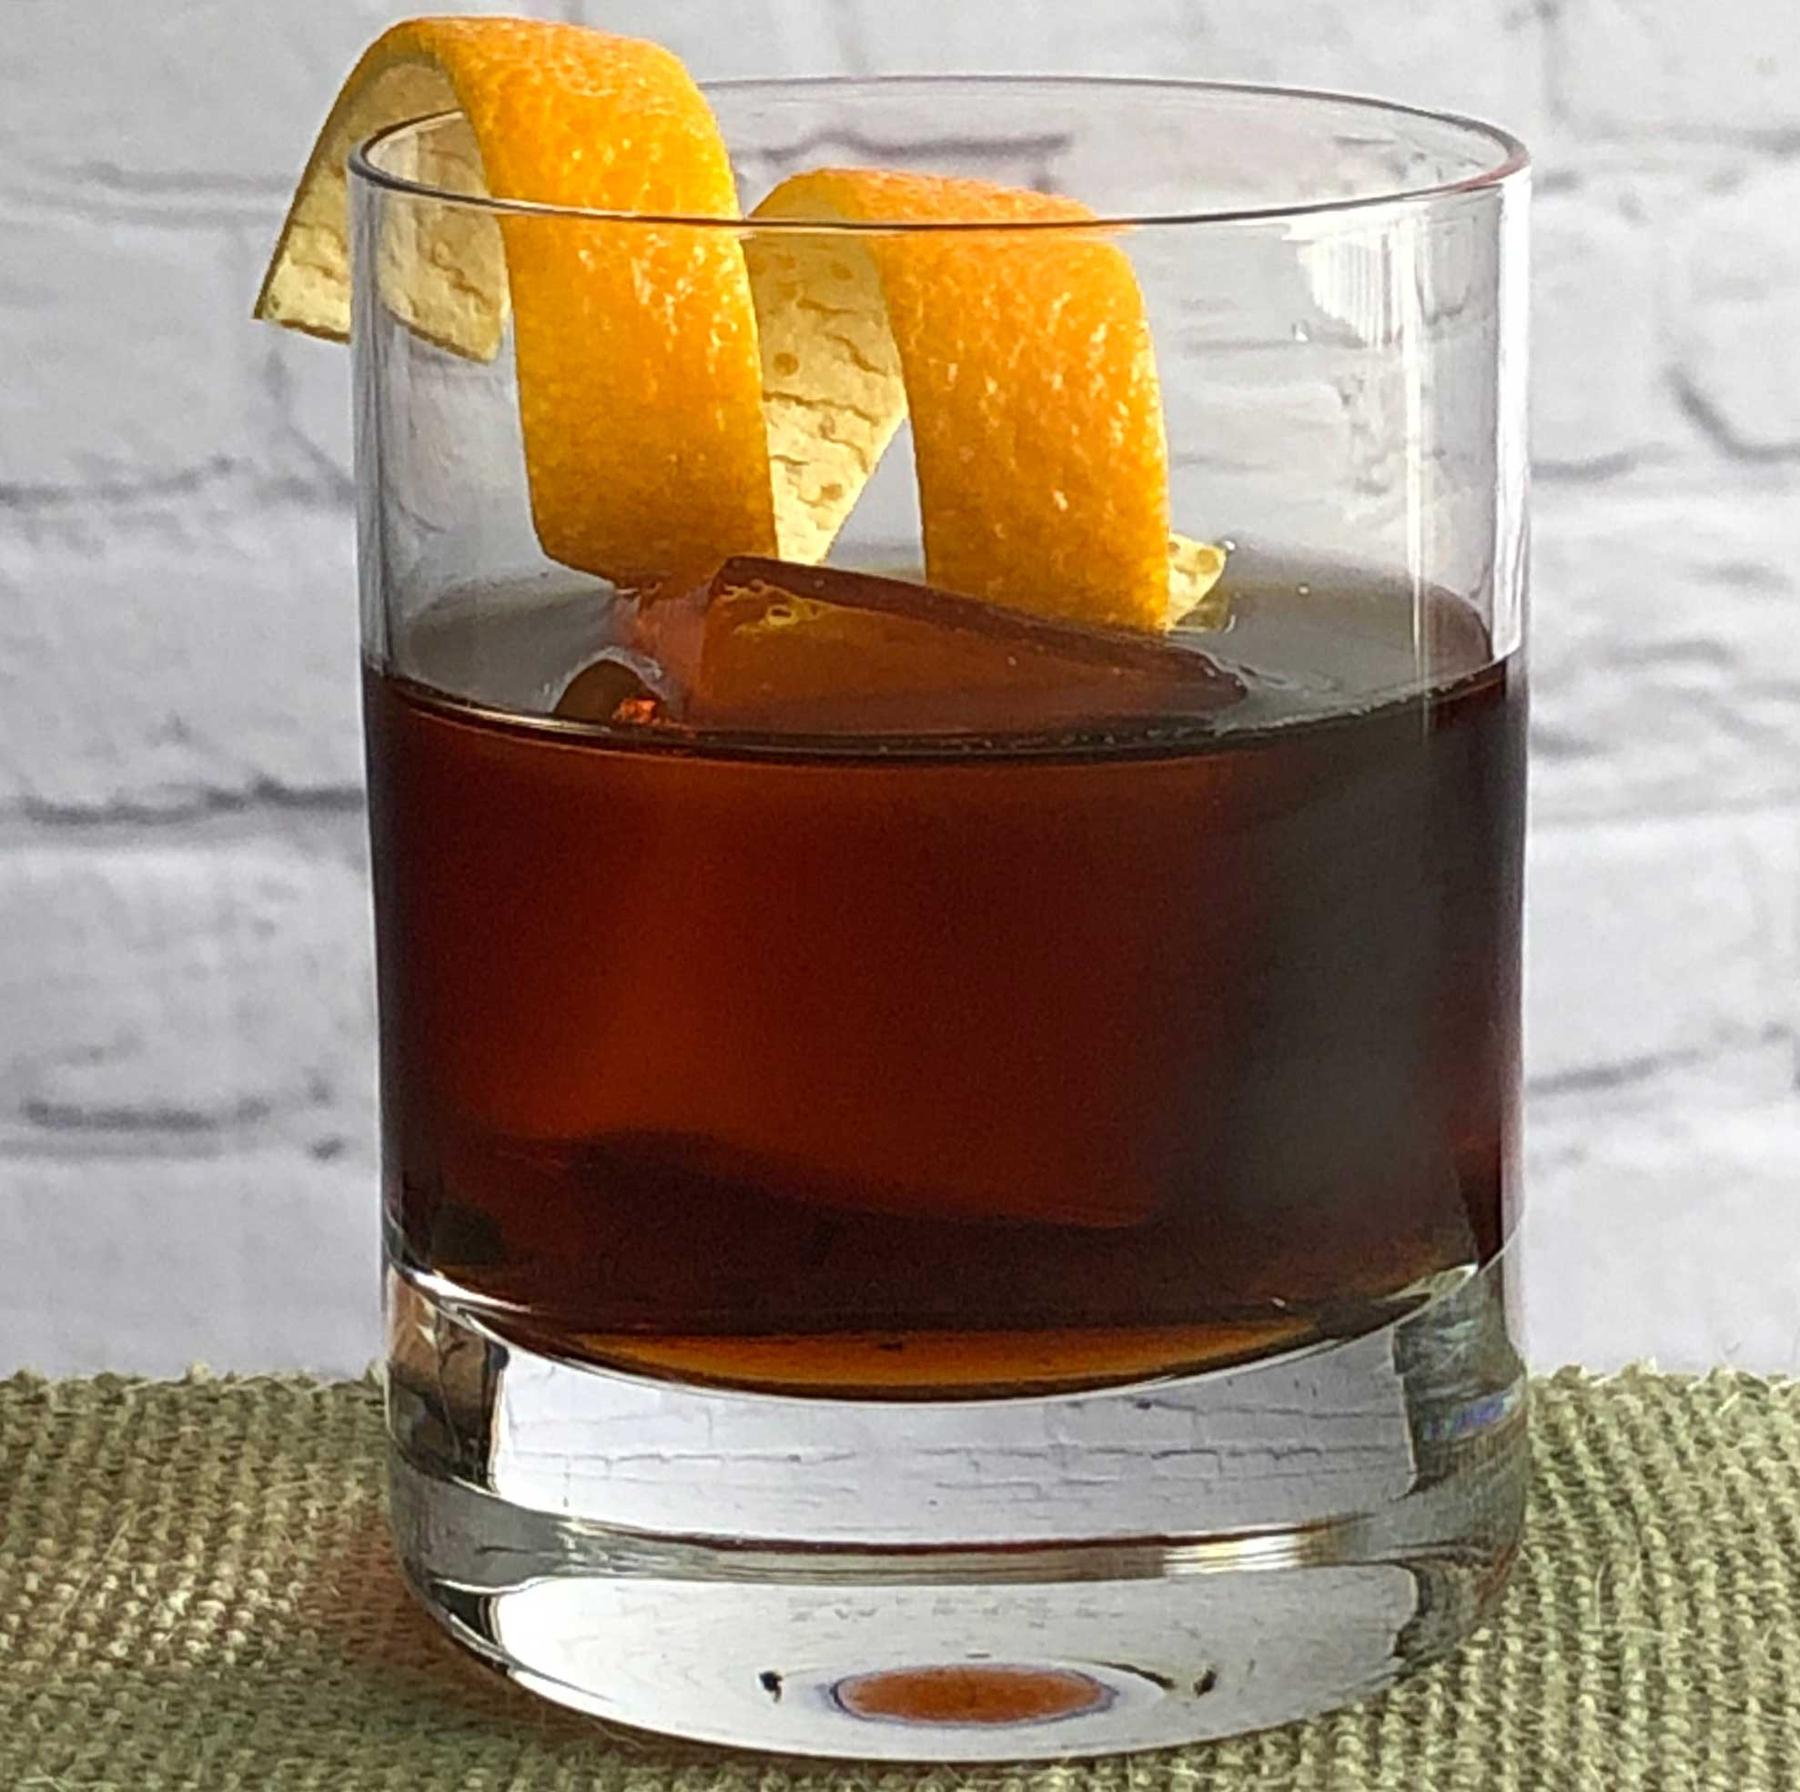 An example of the Amaricanto, the mixed drink (drink) featuring Cocchi Vermouth di Torino ‘Storico’, Elisir Novasalus, and orange bitters; photo by Lee Edwards